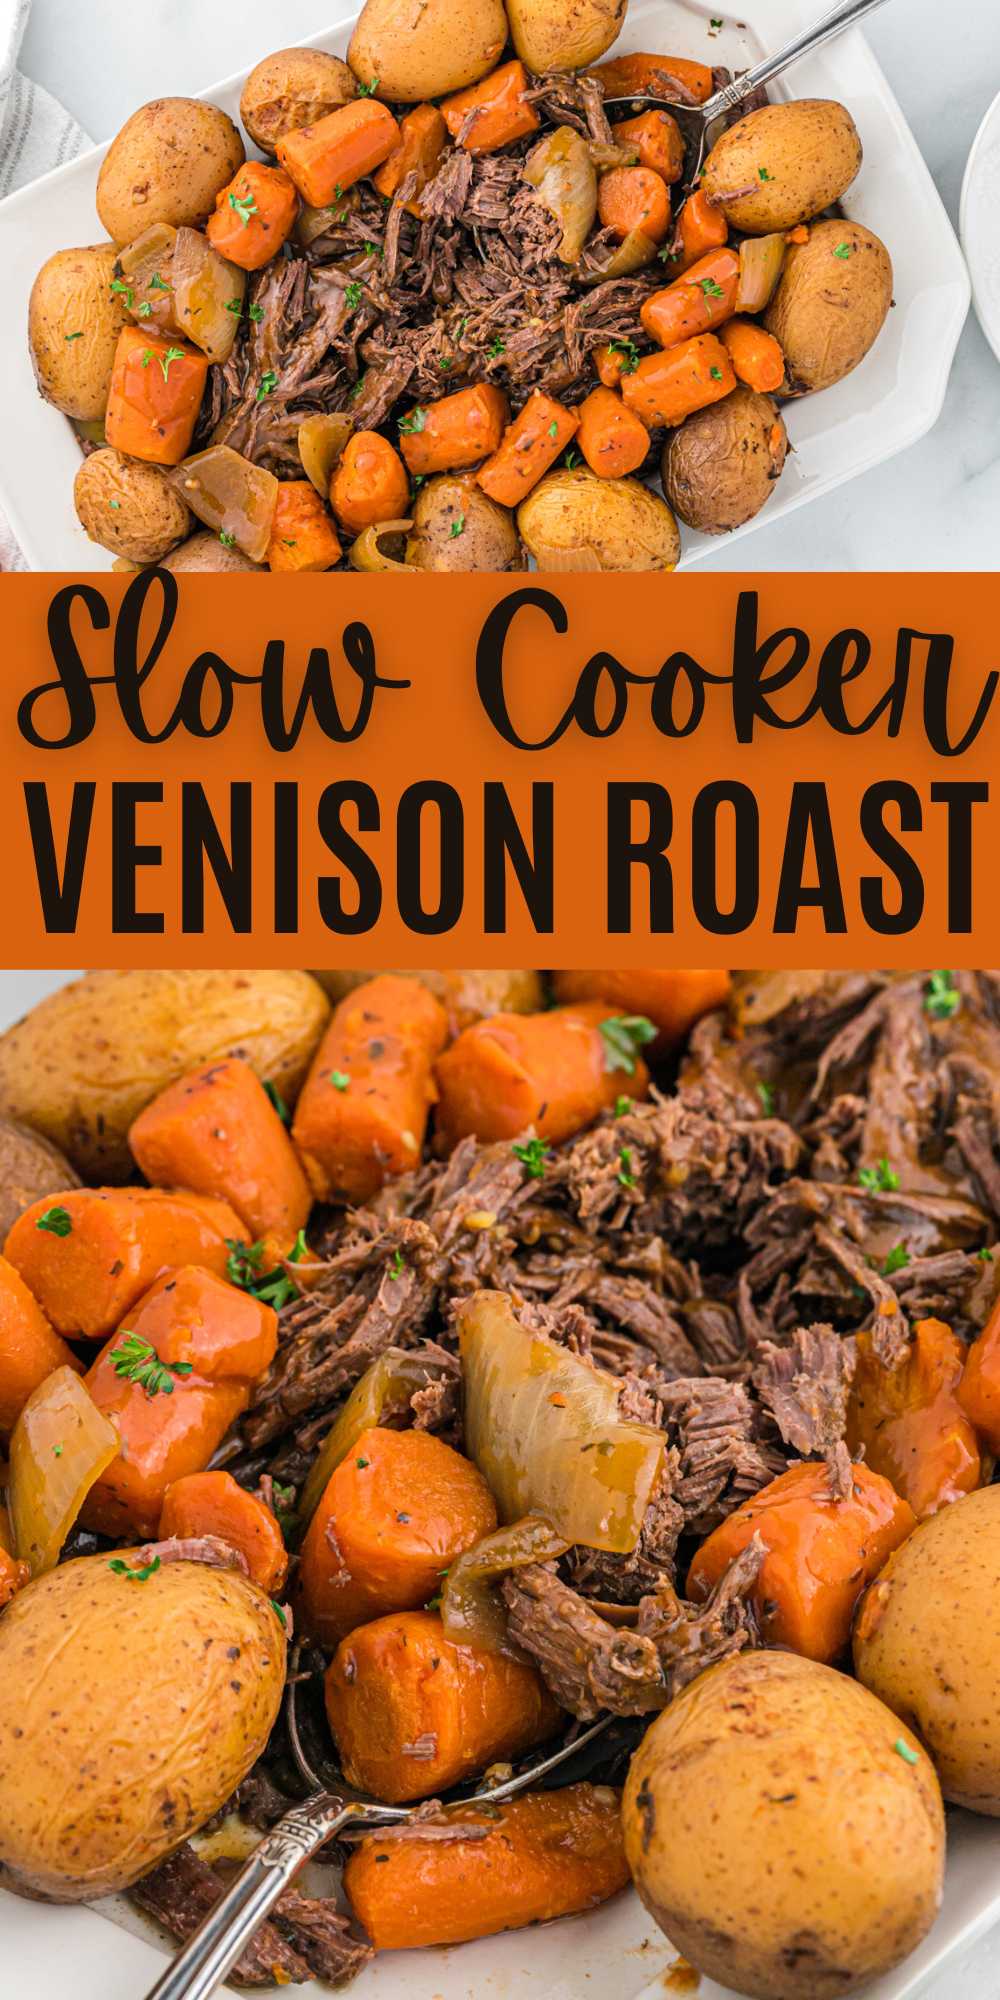 Slow Cooker Venison Roast results in a tender and full of flavor roast every time. Add vegetables and seasoning for a delicious meal idea. Venison Roast Slow Cooker is the best way to cook your deer meat. The roast cooks tender, juicy and the only way I recommend cooking this cut of meat. #eatingonadime #venisonroast #slowcookervenisonroast